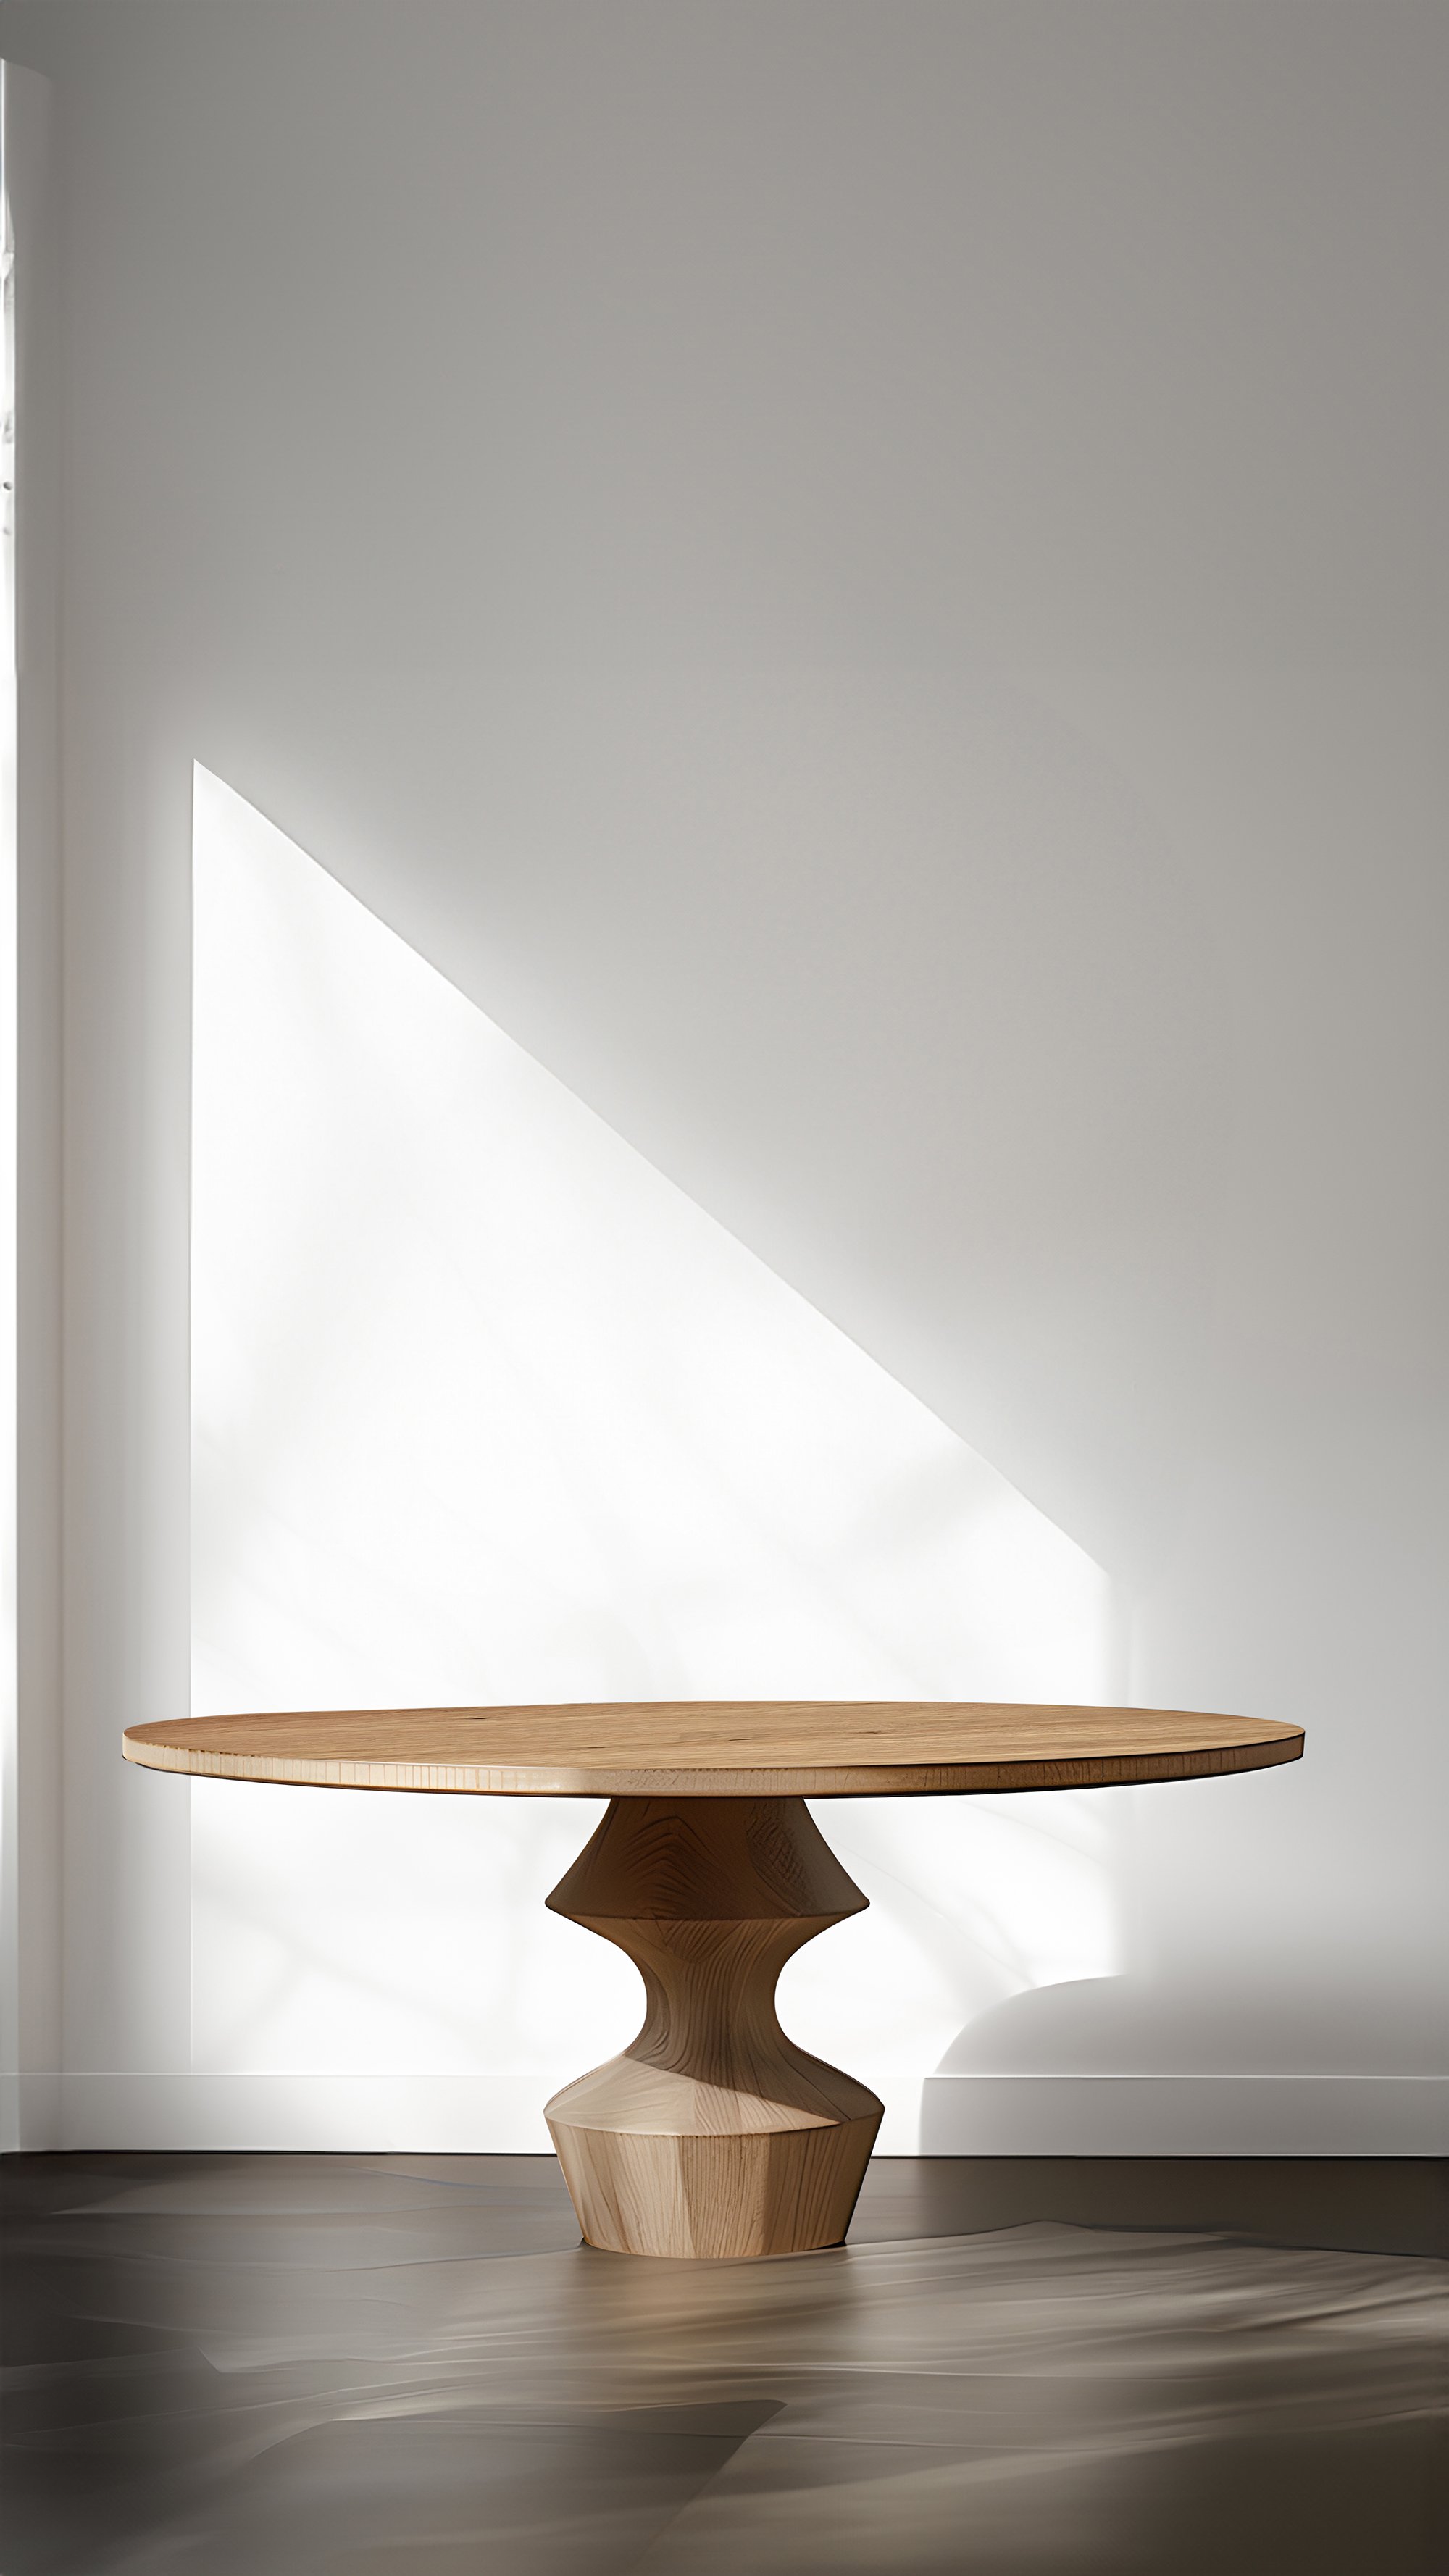 Socle Dessert Tables No11, Sweet Design in Solid Wood by NONO - 5.jpg